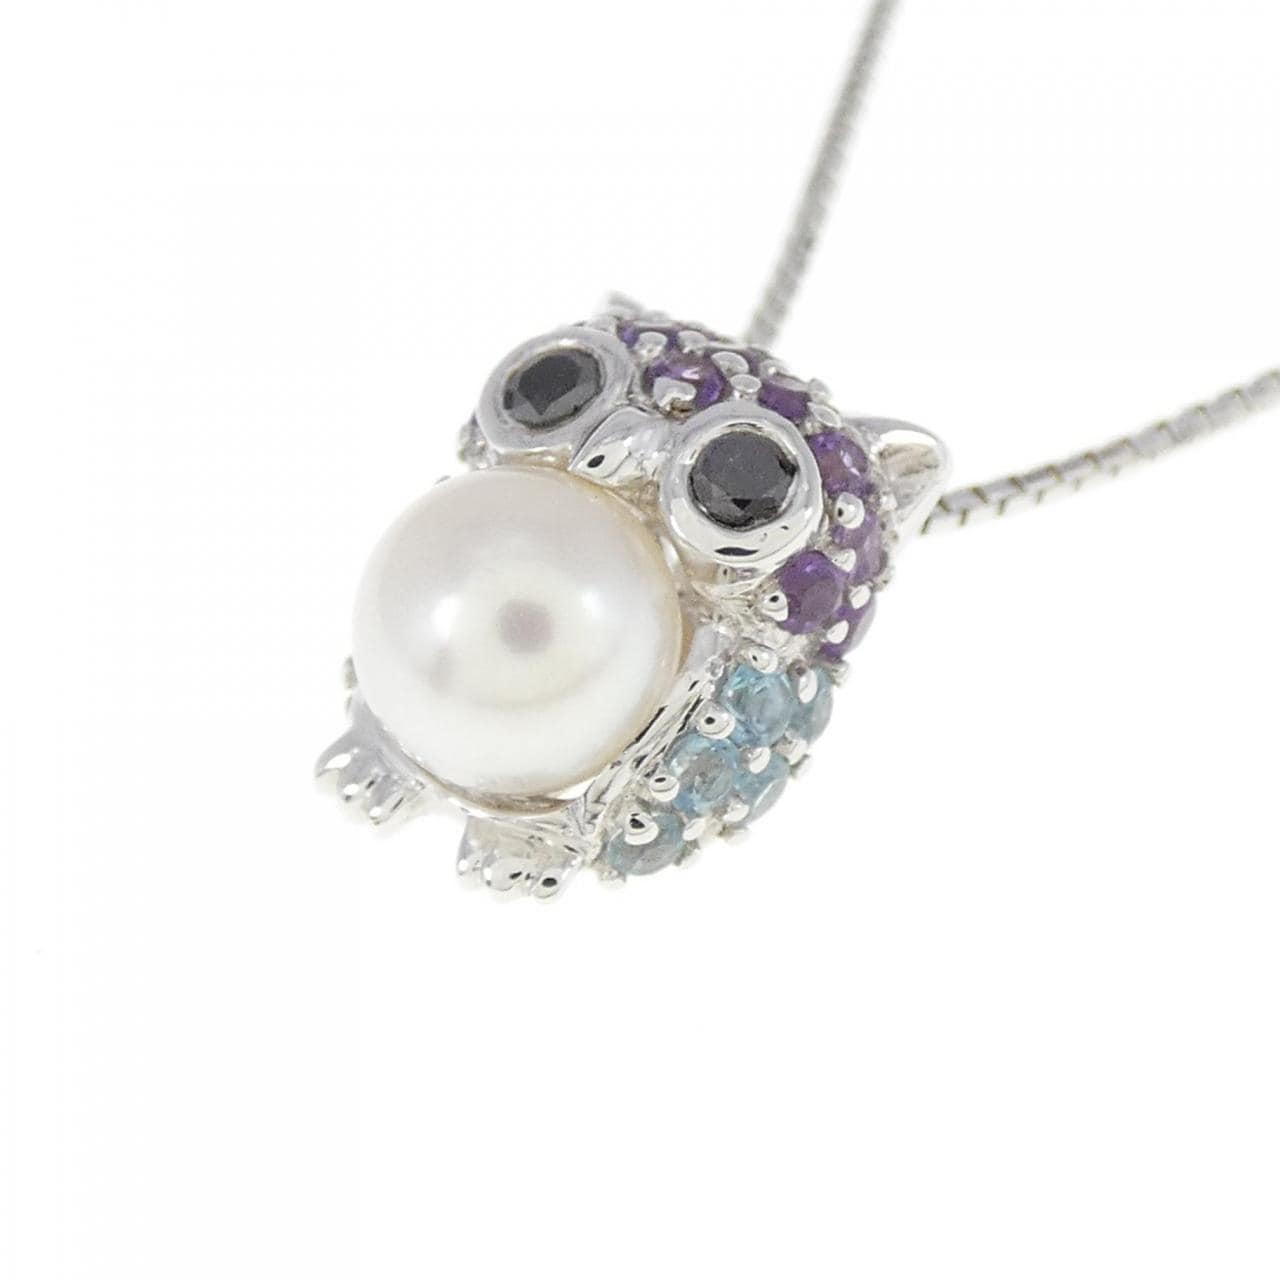 K18WG owl colored stone necklace